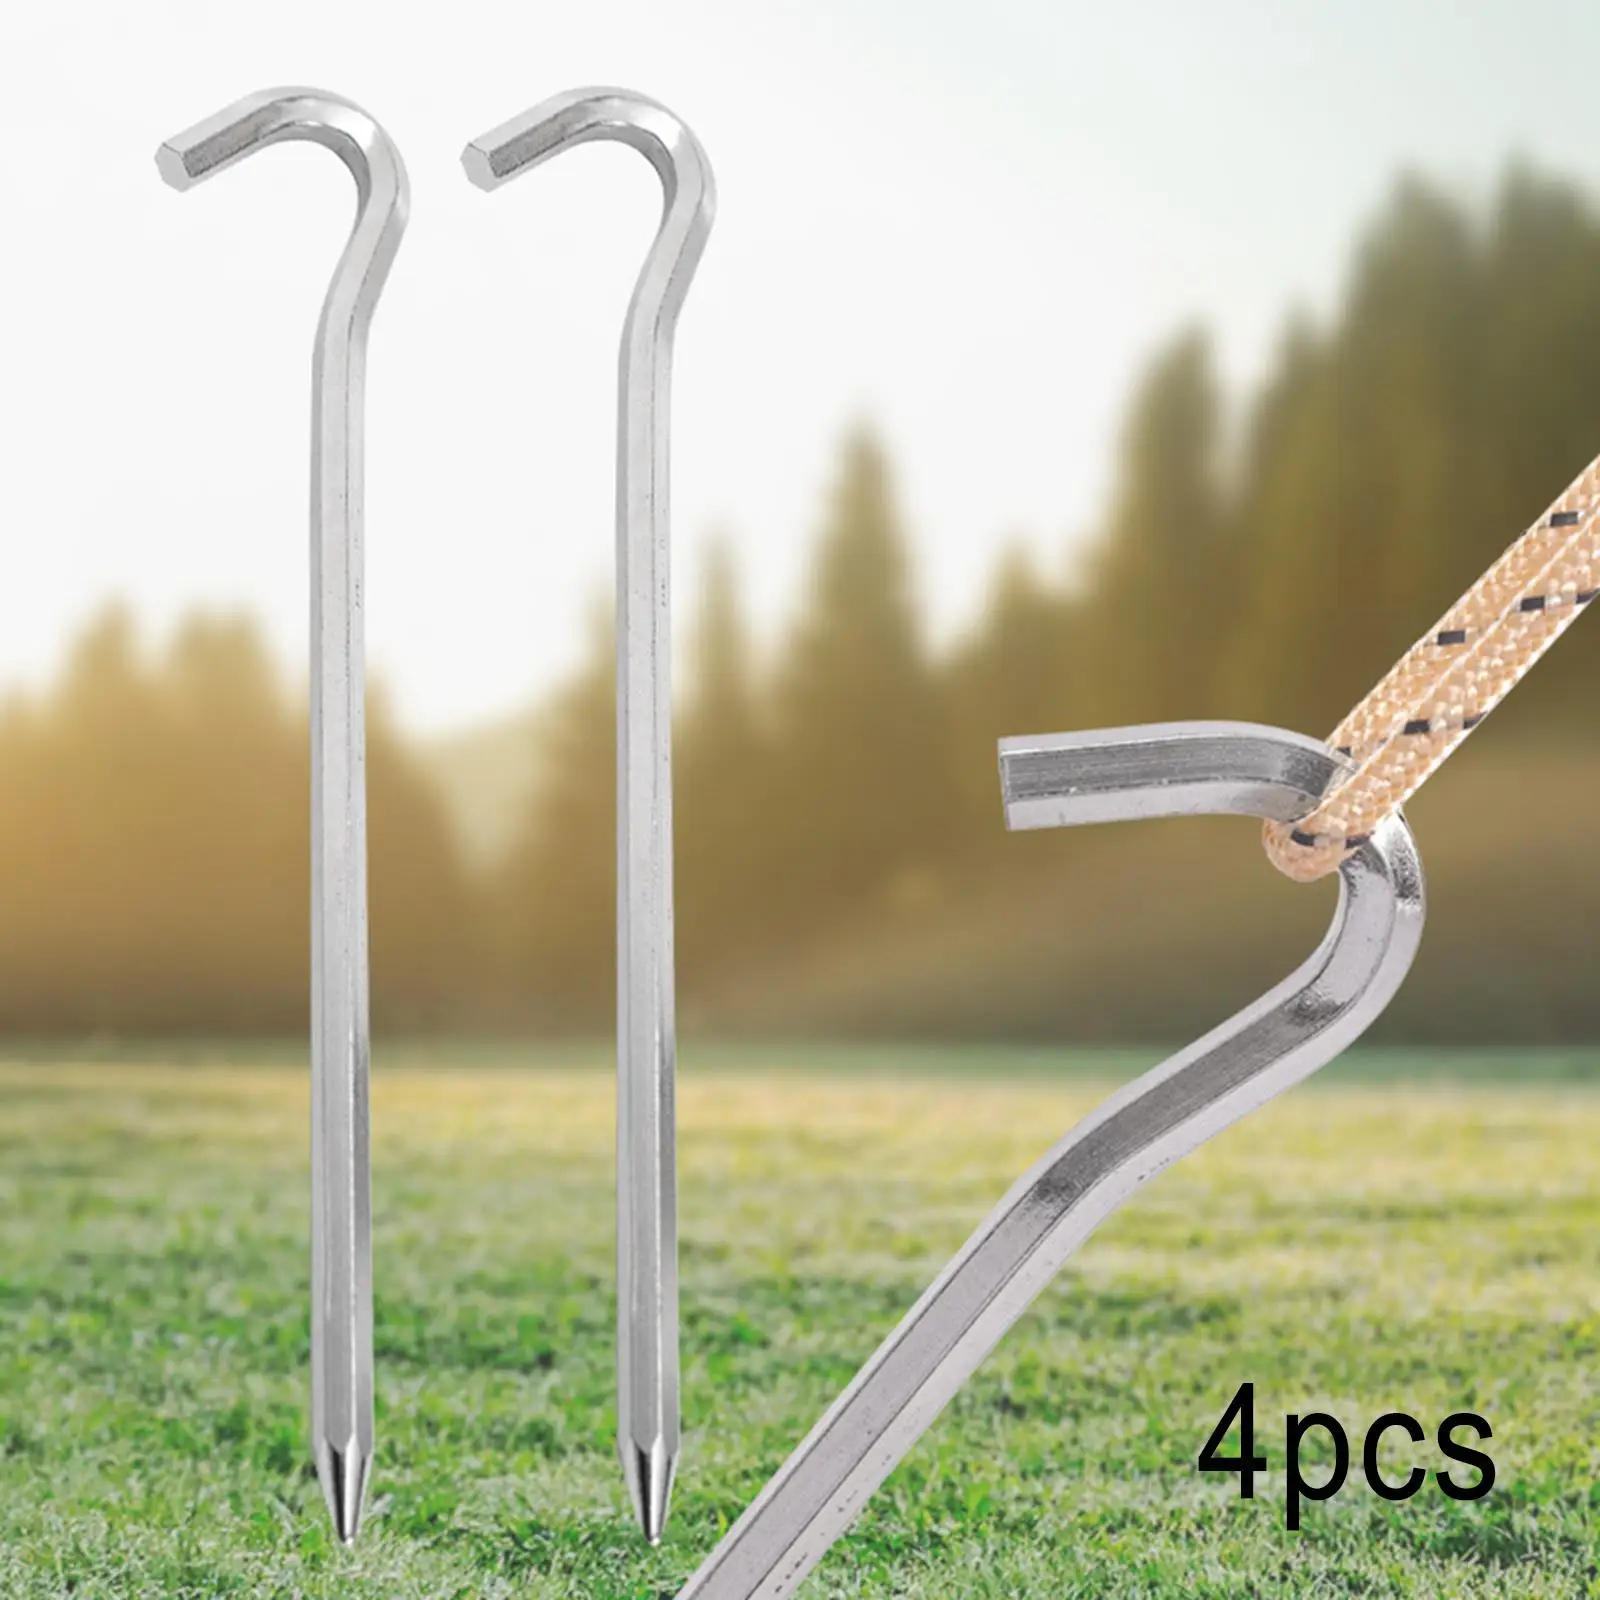 4Pcs Tent Pegs Garden Stakes Camping Tent Nails for Camping Awning Canopy